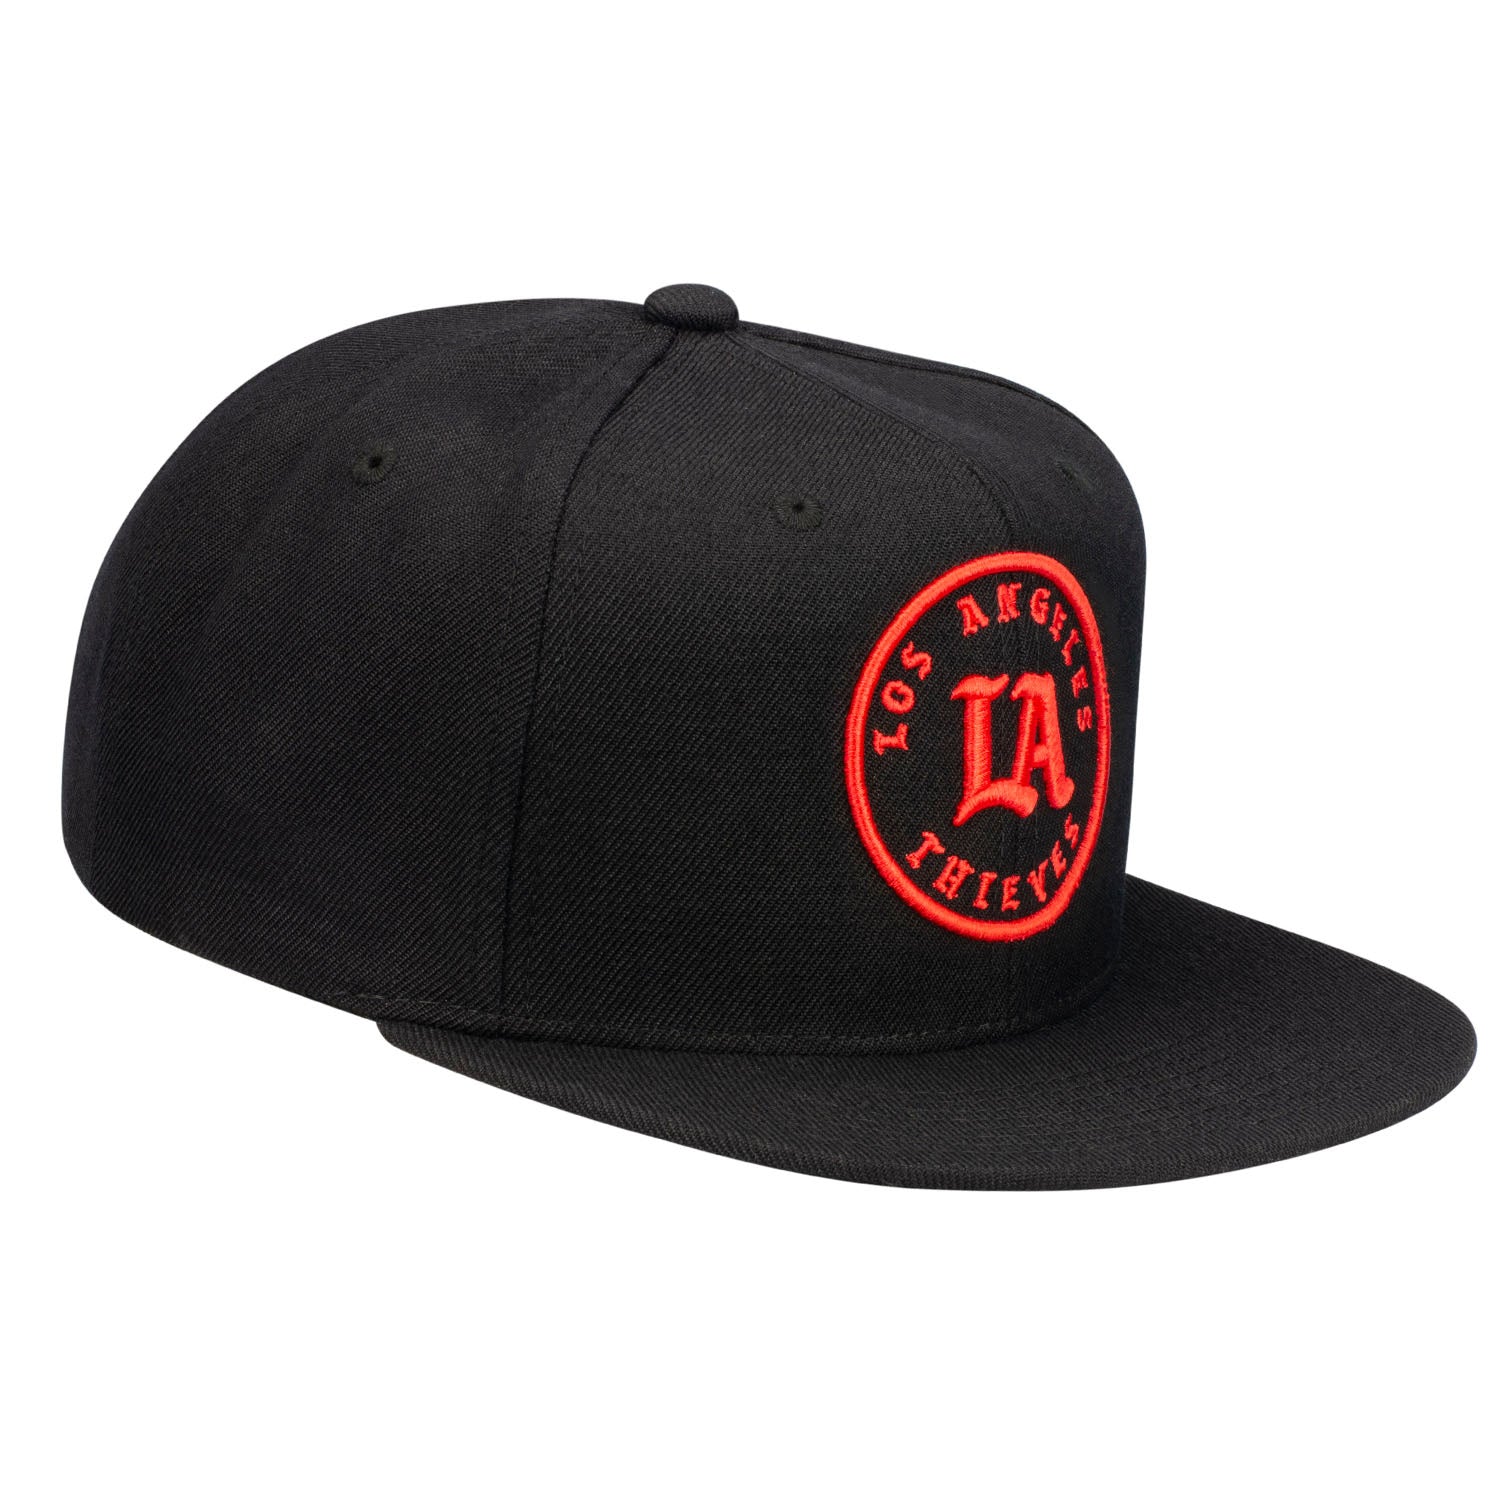 LA Thieves Mitchell & Ness Snapback in Black - Right View